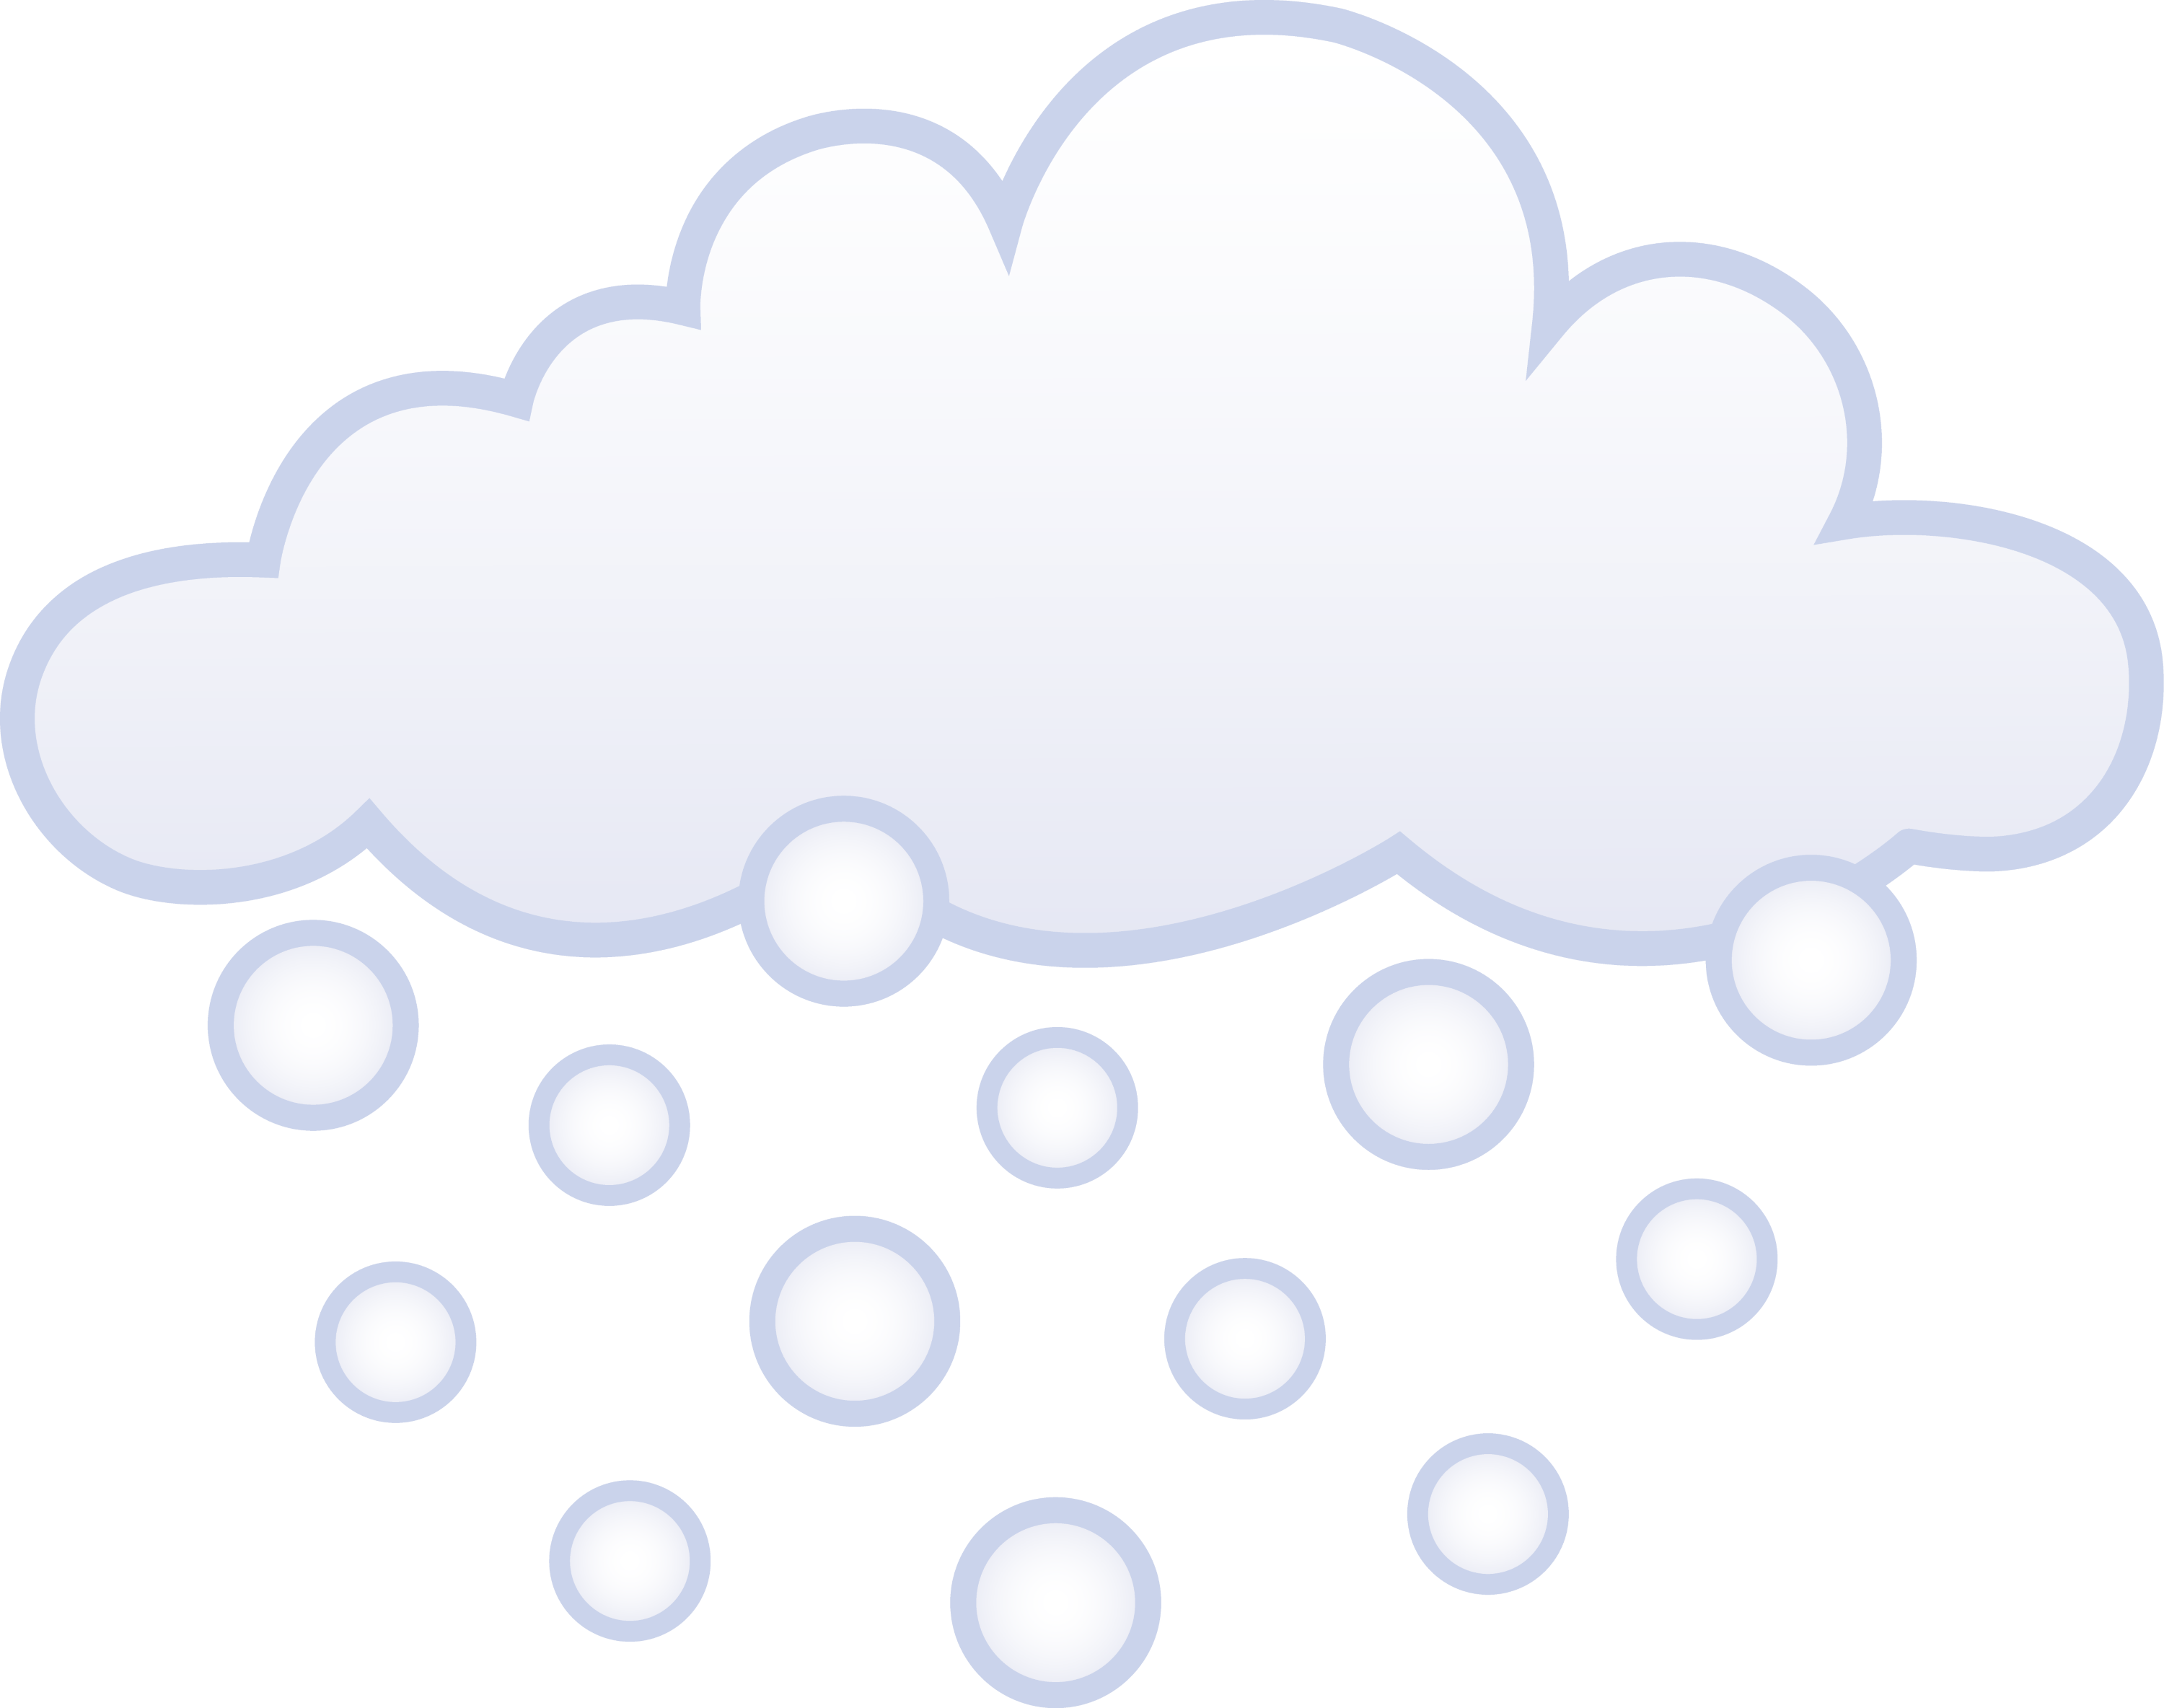 snow weather clipart - photo #16